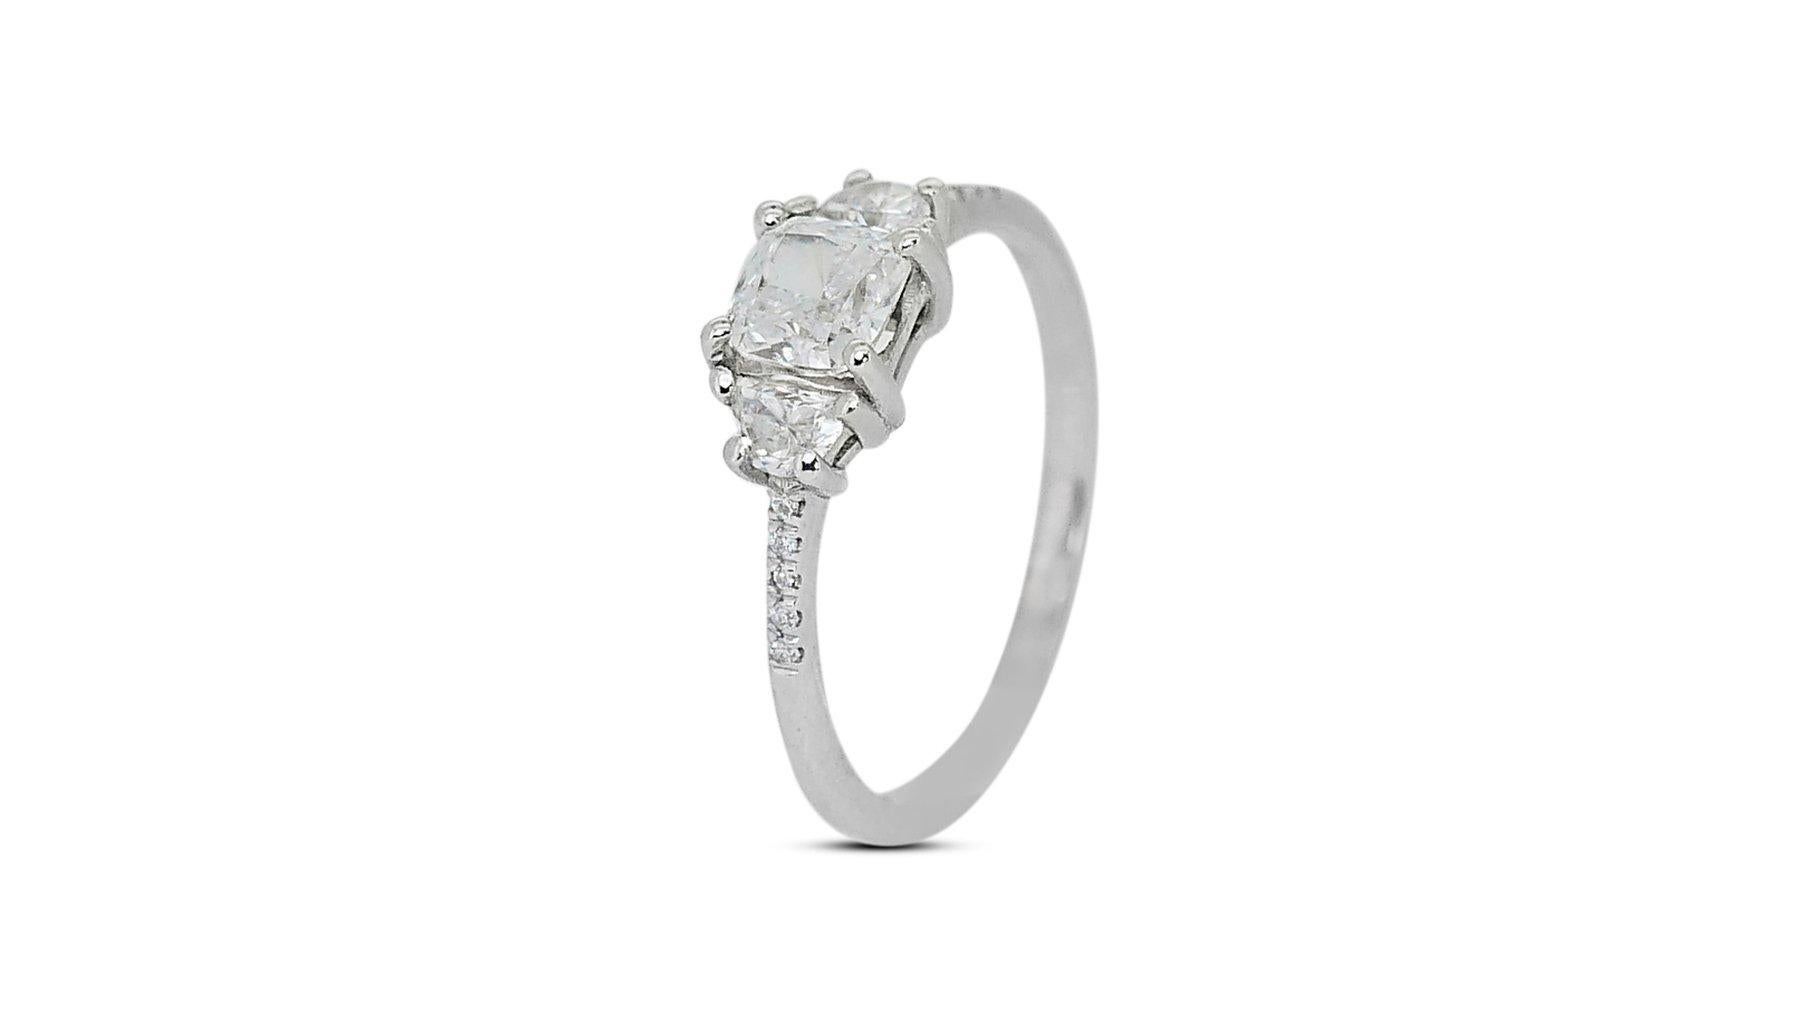 Captivating 18K White Gold Natural Diamond Halo Ring w/1.31 Carat- GIA Certified In New Condition For Sale In רמת גן, IL